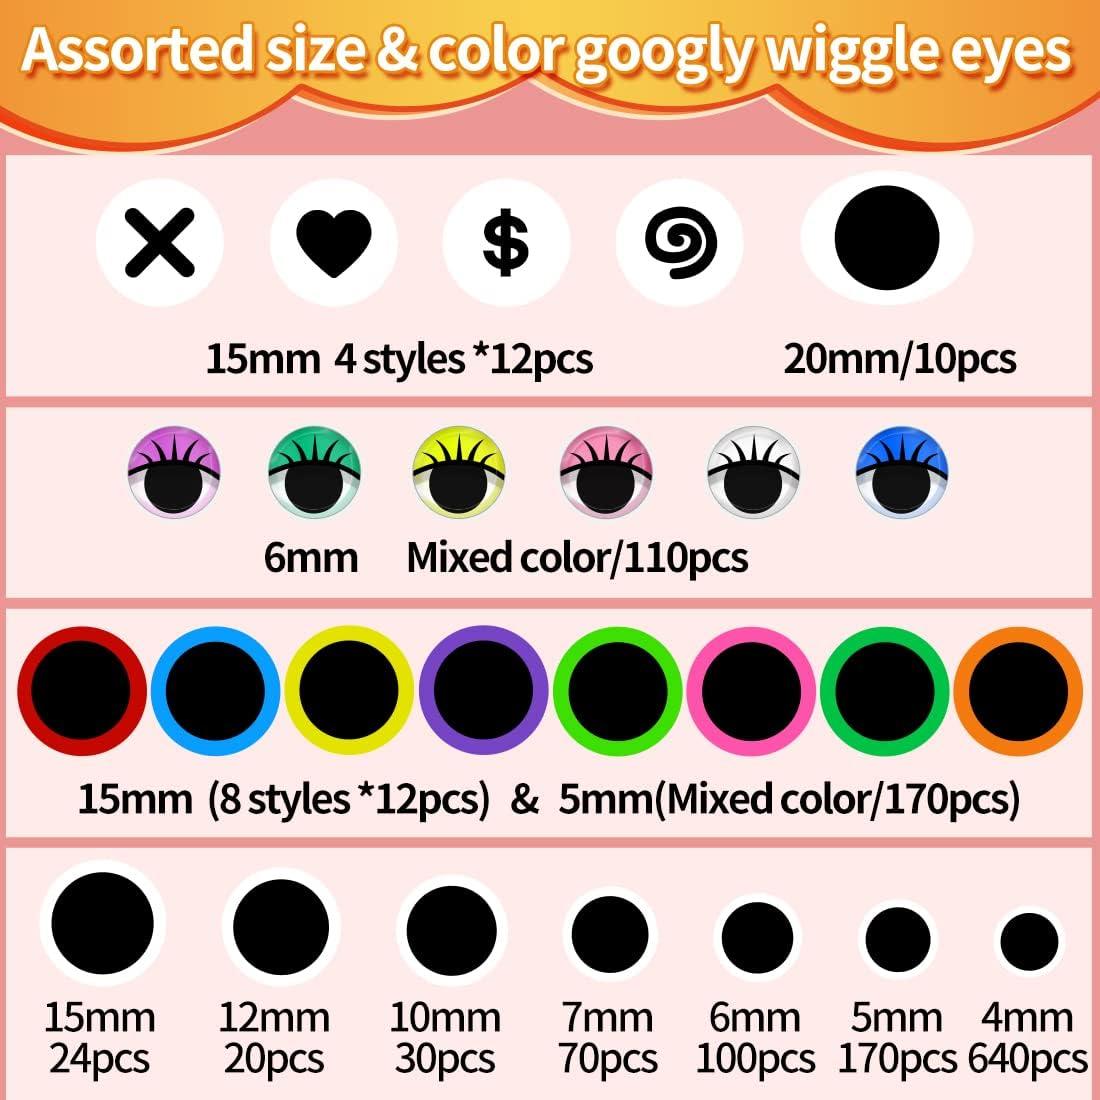 Iooleem 1518pcs Googly Wiggle Eyes Self Adhesive in 24 Styles, Assorted  Colors and Sizes Wiggle Eyes, Googly Eyes, Googly Eyes for Crafts. 24Grids  Multi-colored